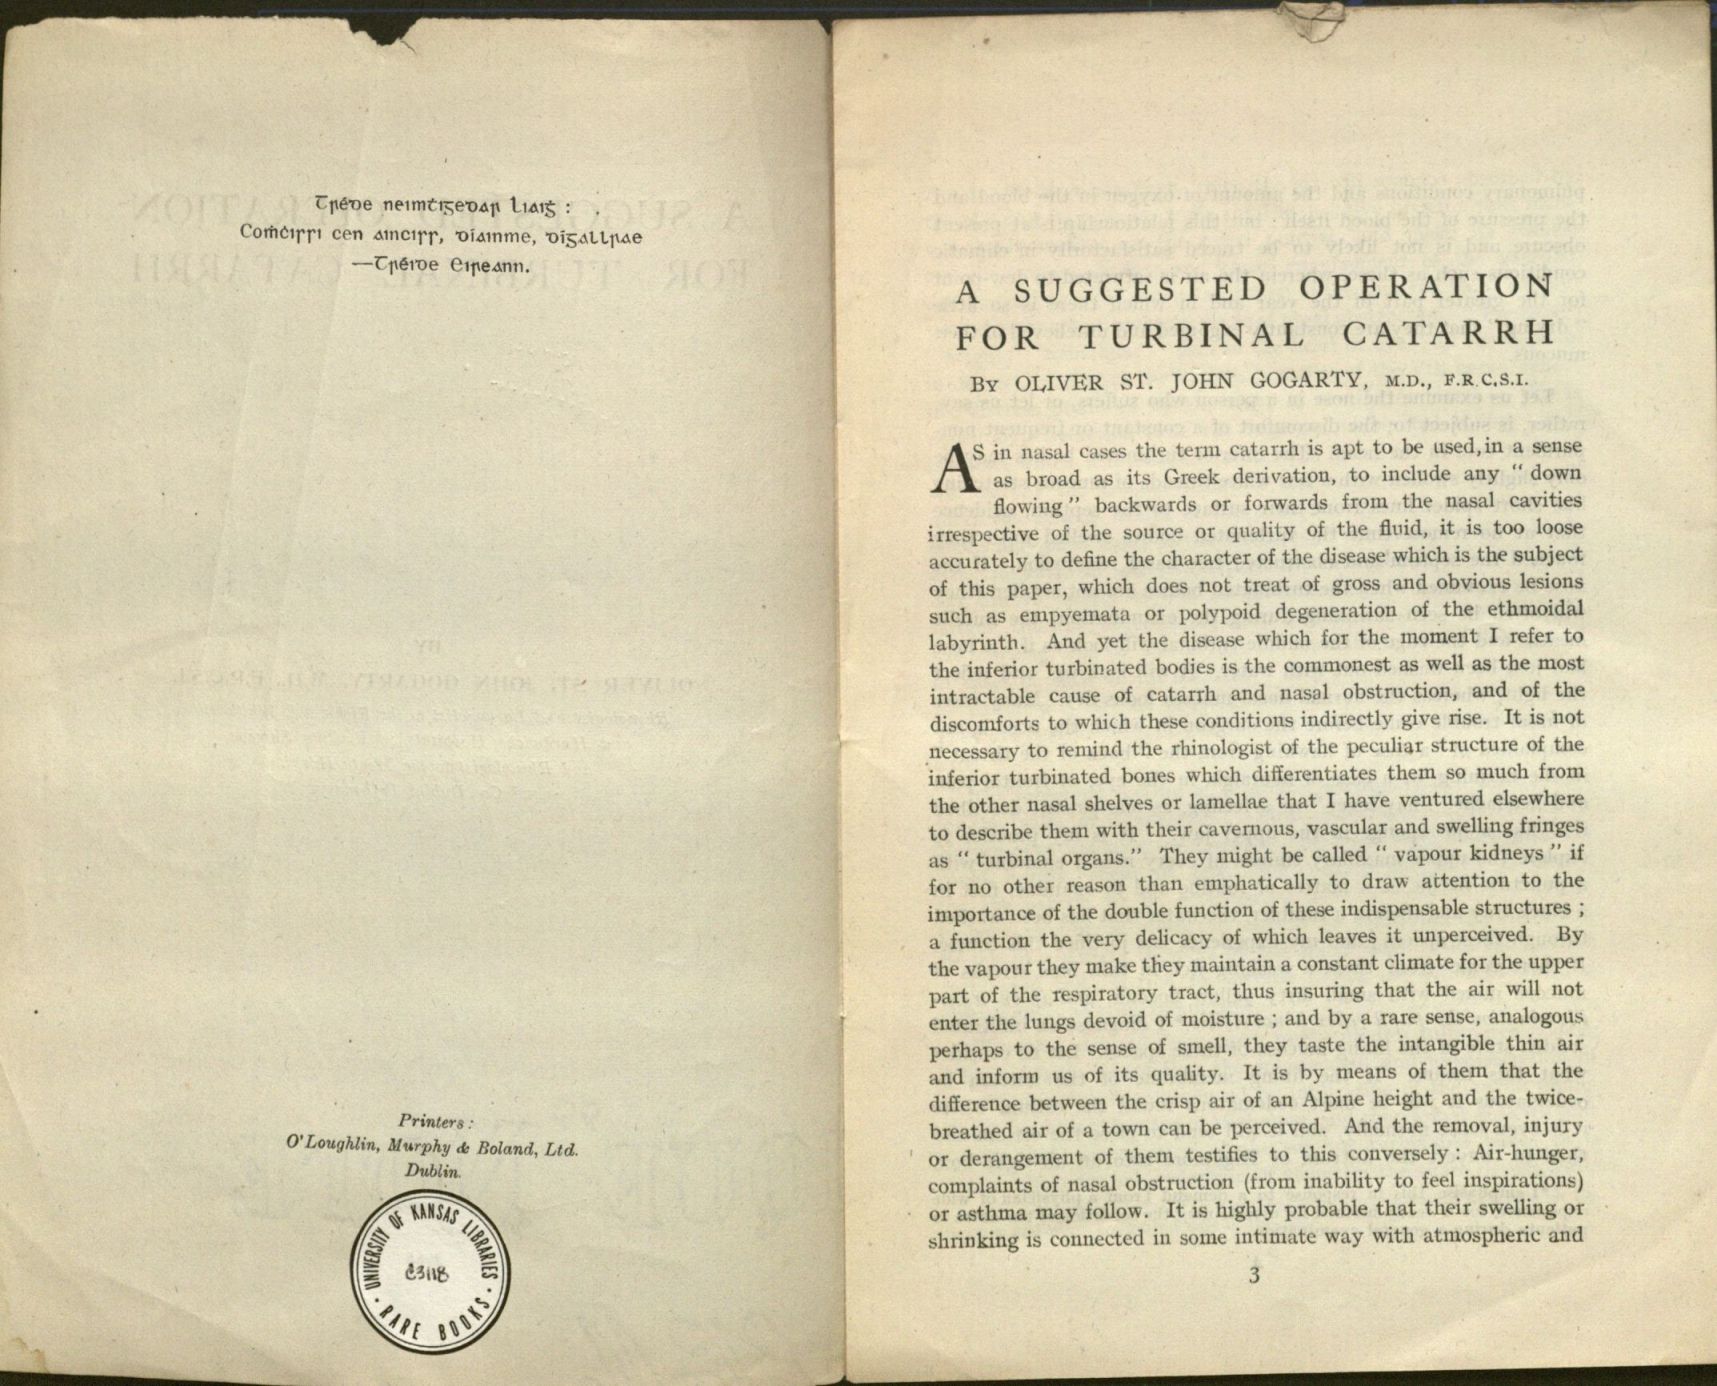 Image of the medical pamphlet, "A Suggested Operation for Turbinal Catarrh" by Oliver St. John Gogarty